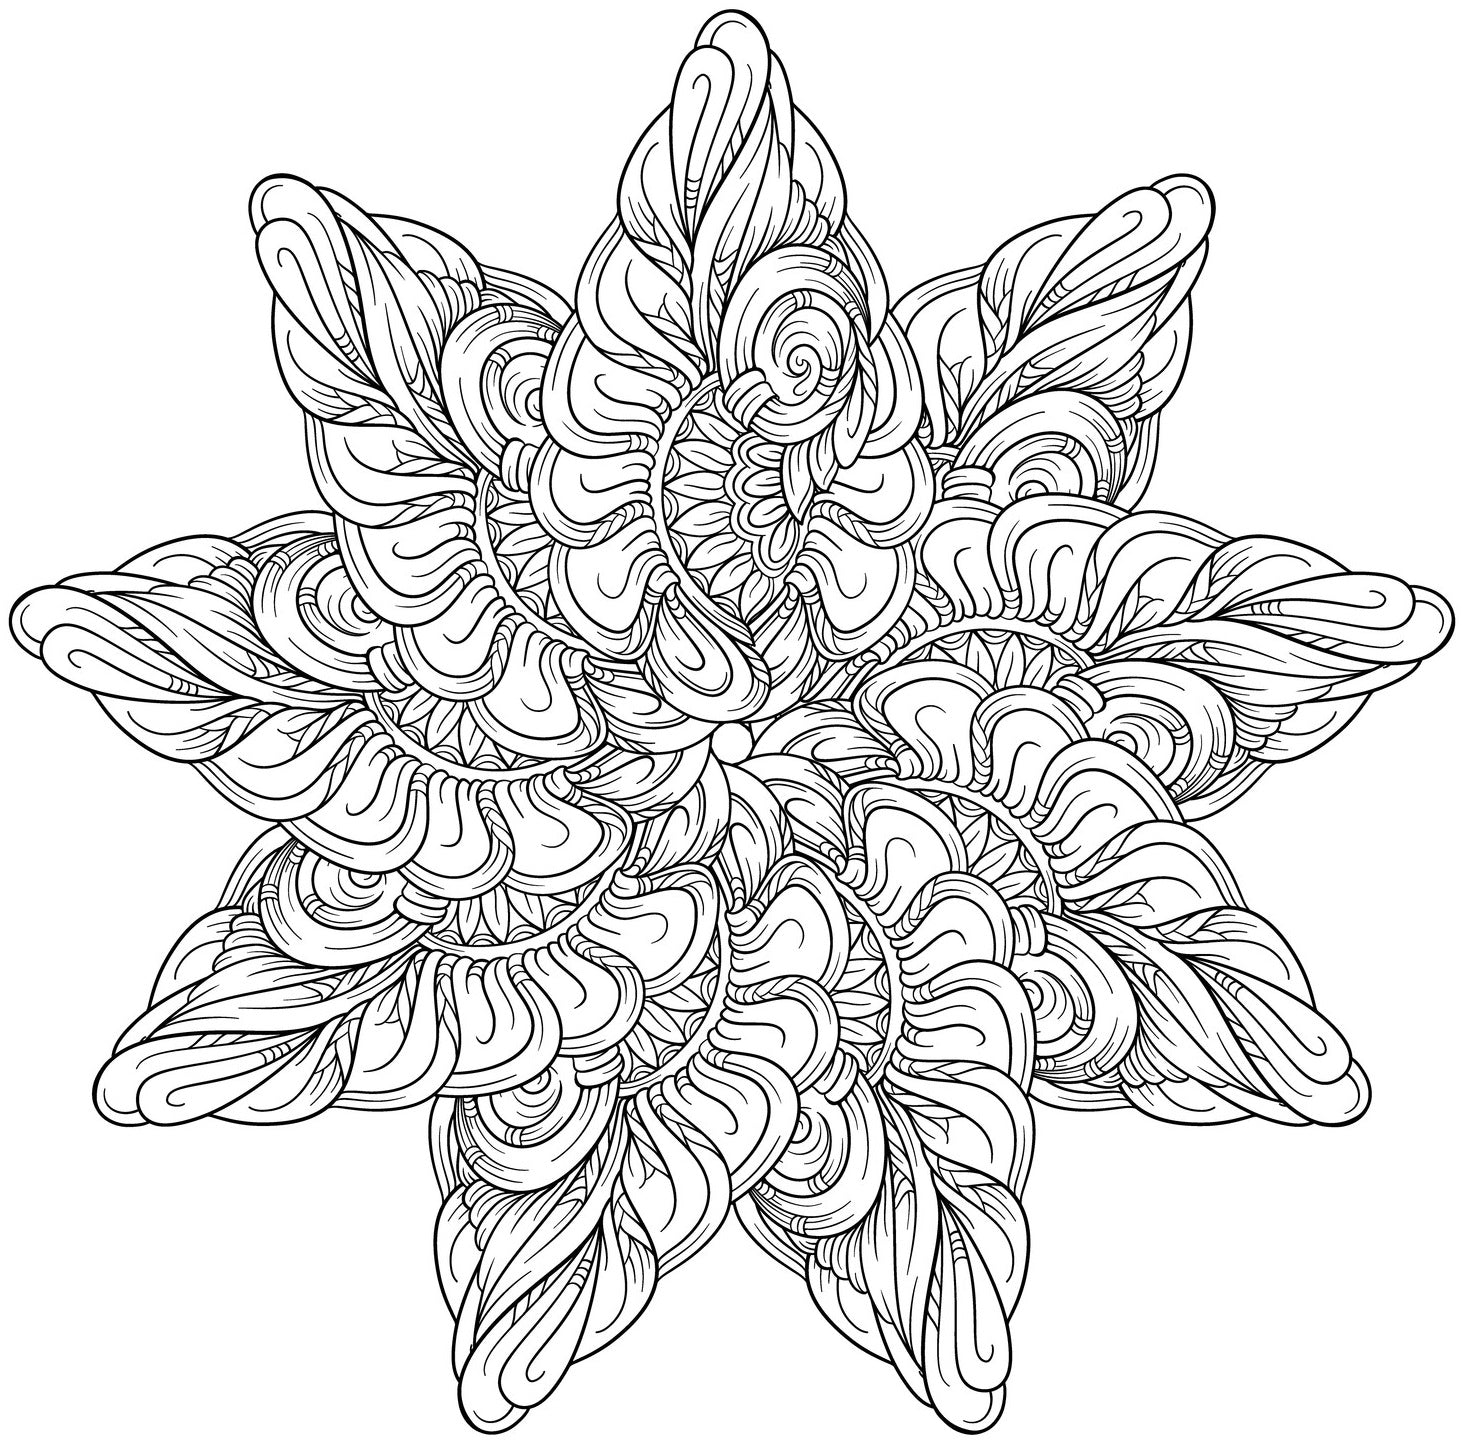 Mandala Stars - Stress Relieving Patterns Coloring Book